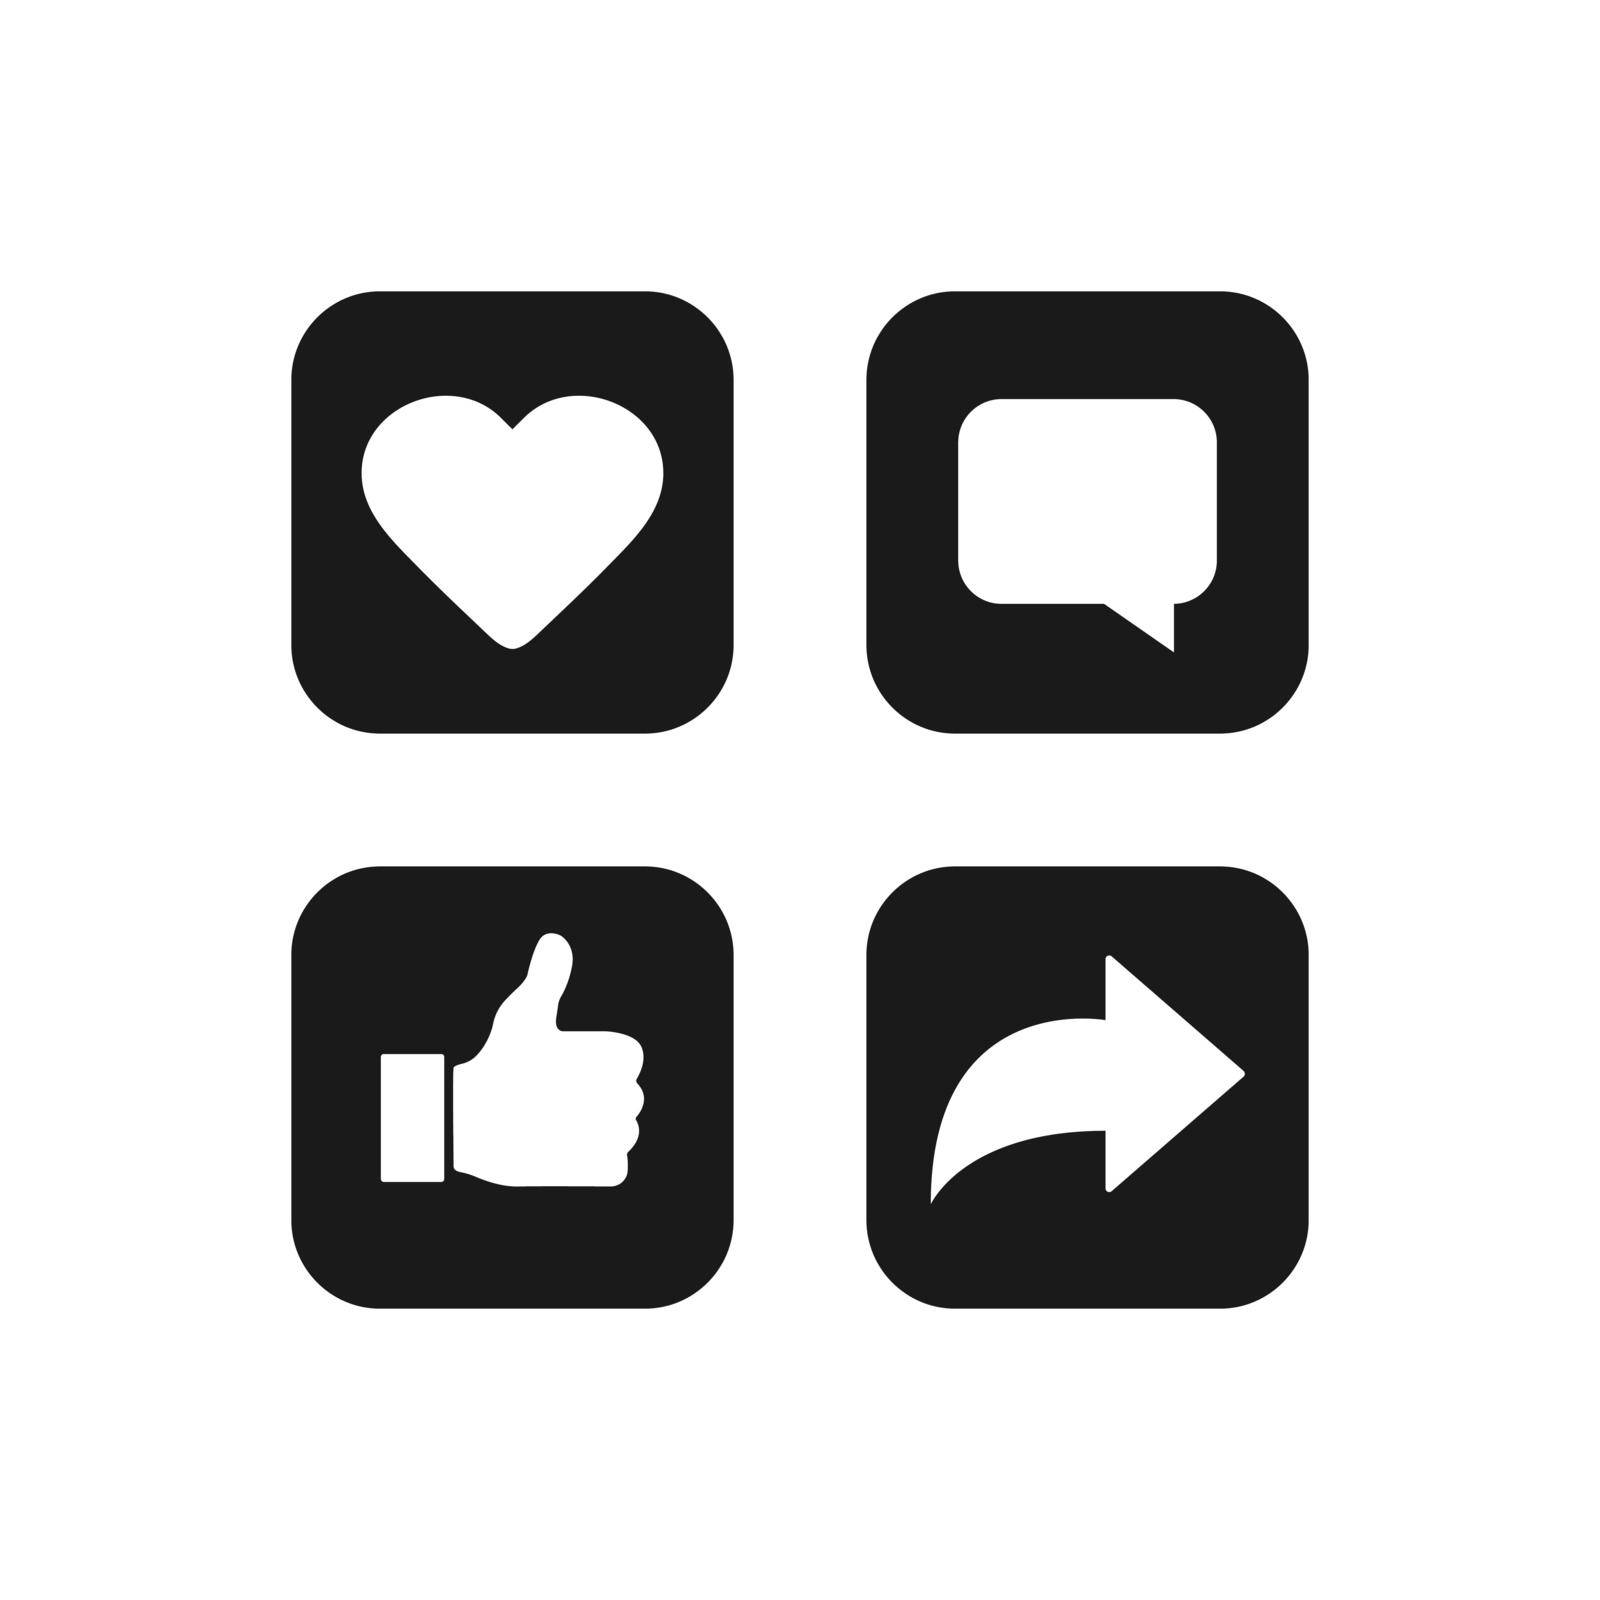 Heart, comment, thumbs up and repost icons isolated on white background. Social media symbols in black Vector EPS10